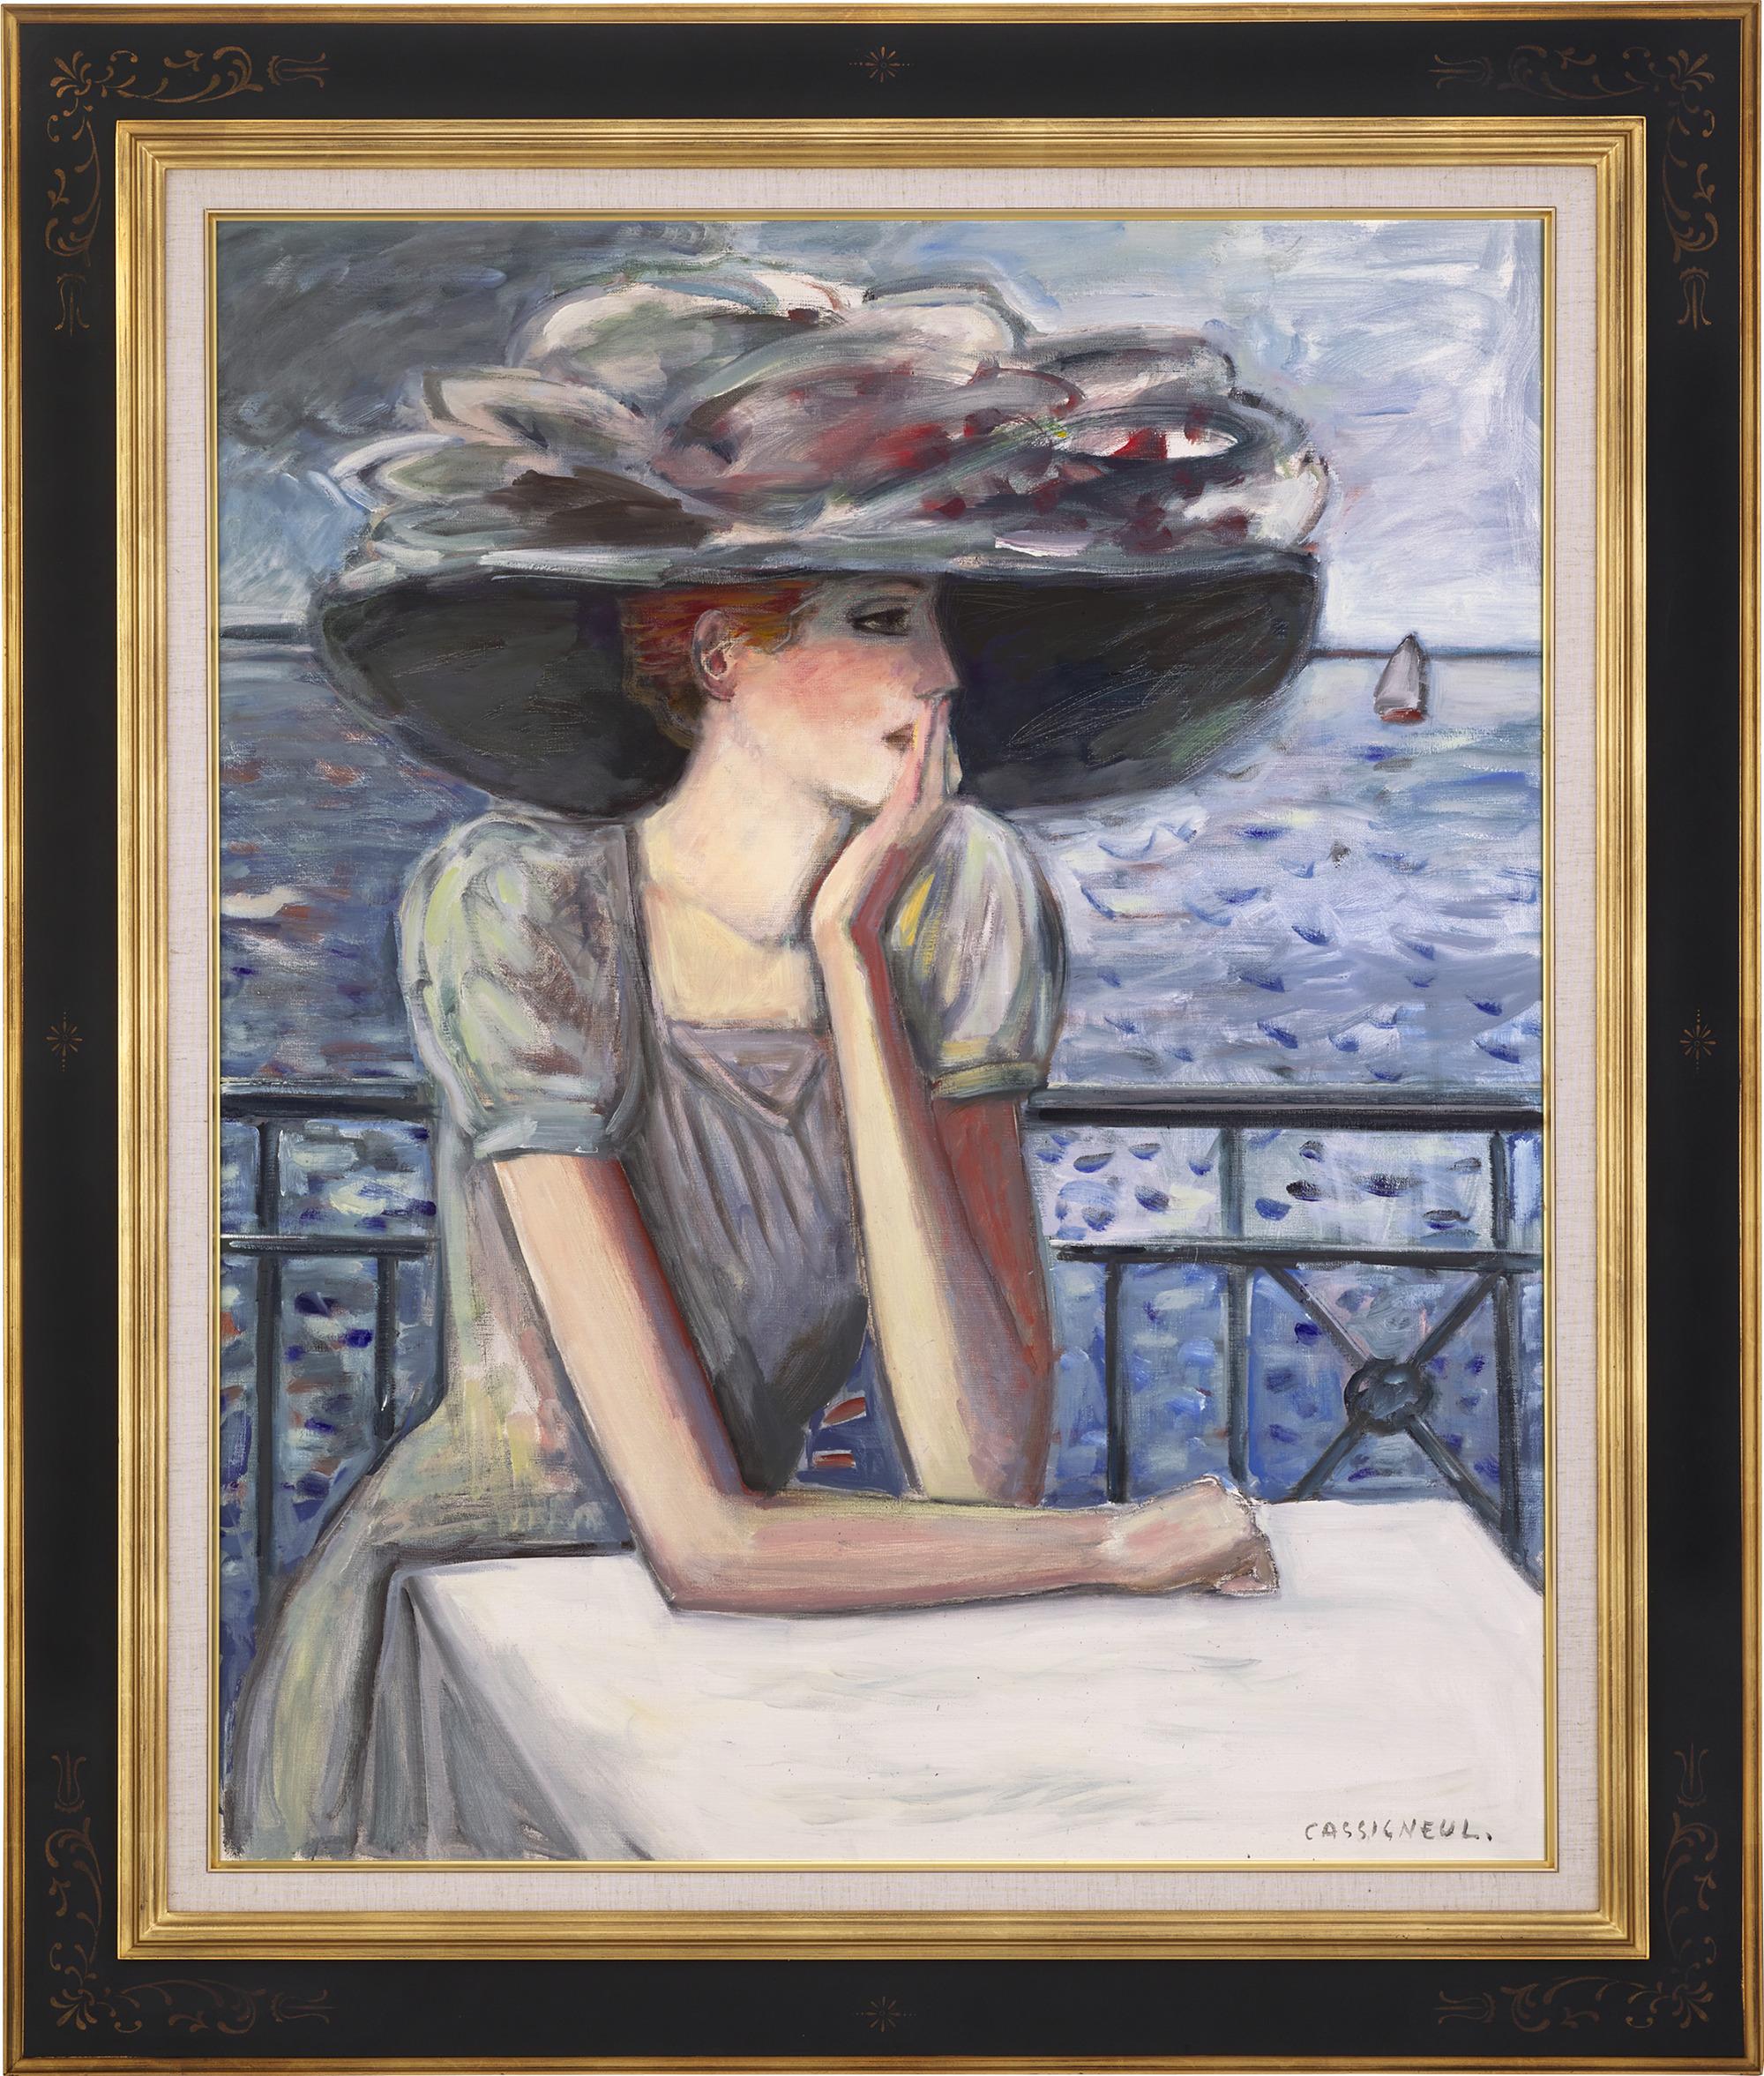 L’air Qu’on Respire by Jean Pierre Cassigneul - Painting by Jean-Pierre Cassigneul